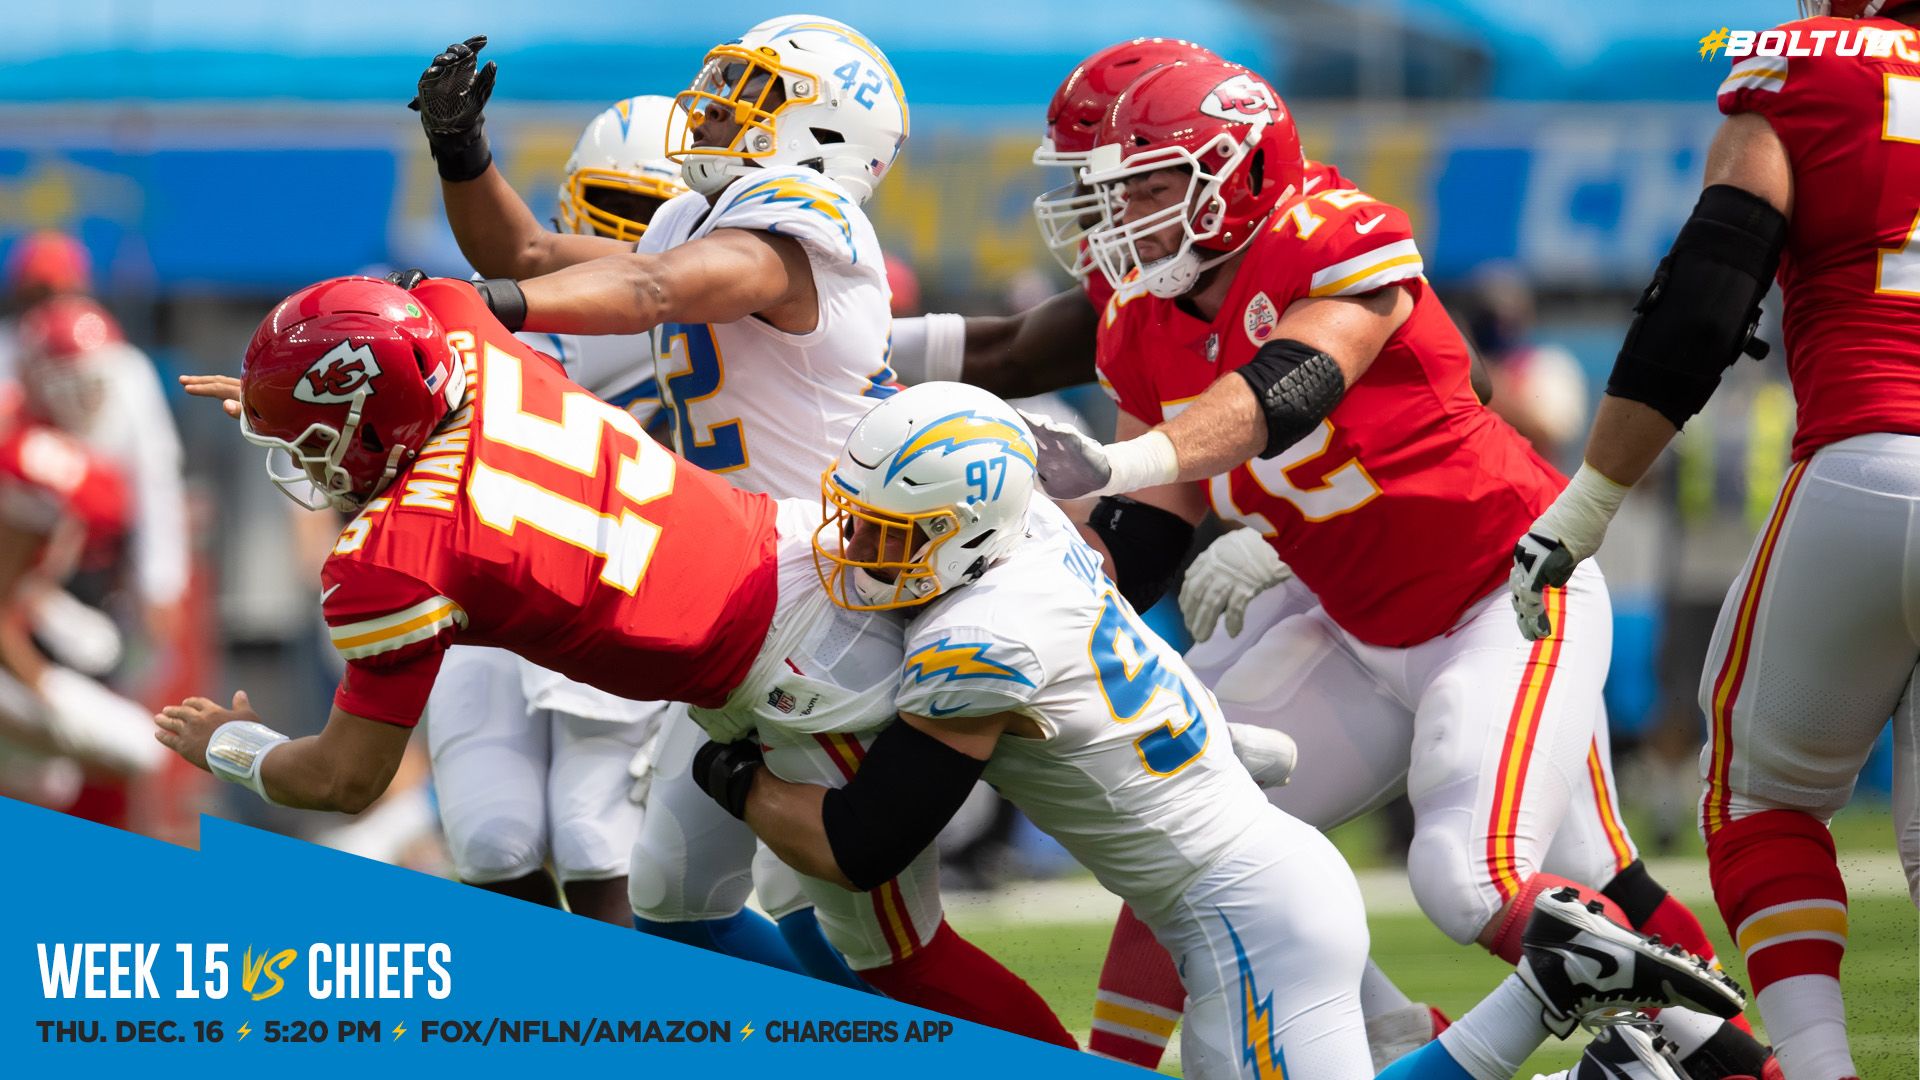 Kansas City Chiefs at Los Angeles Chargers on December 16, 2021